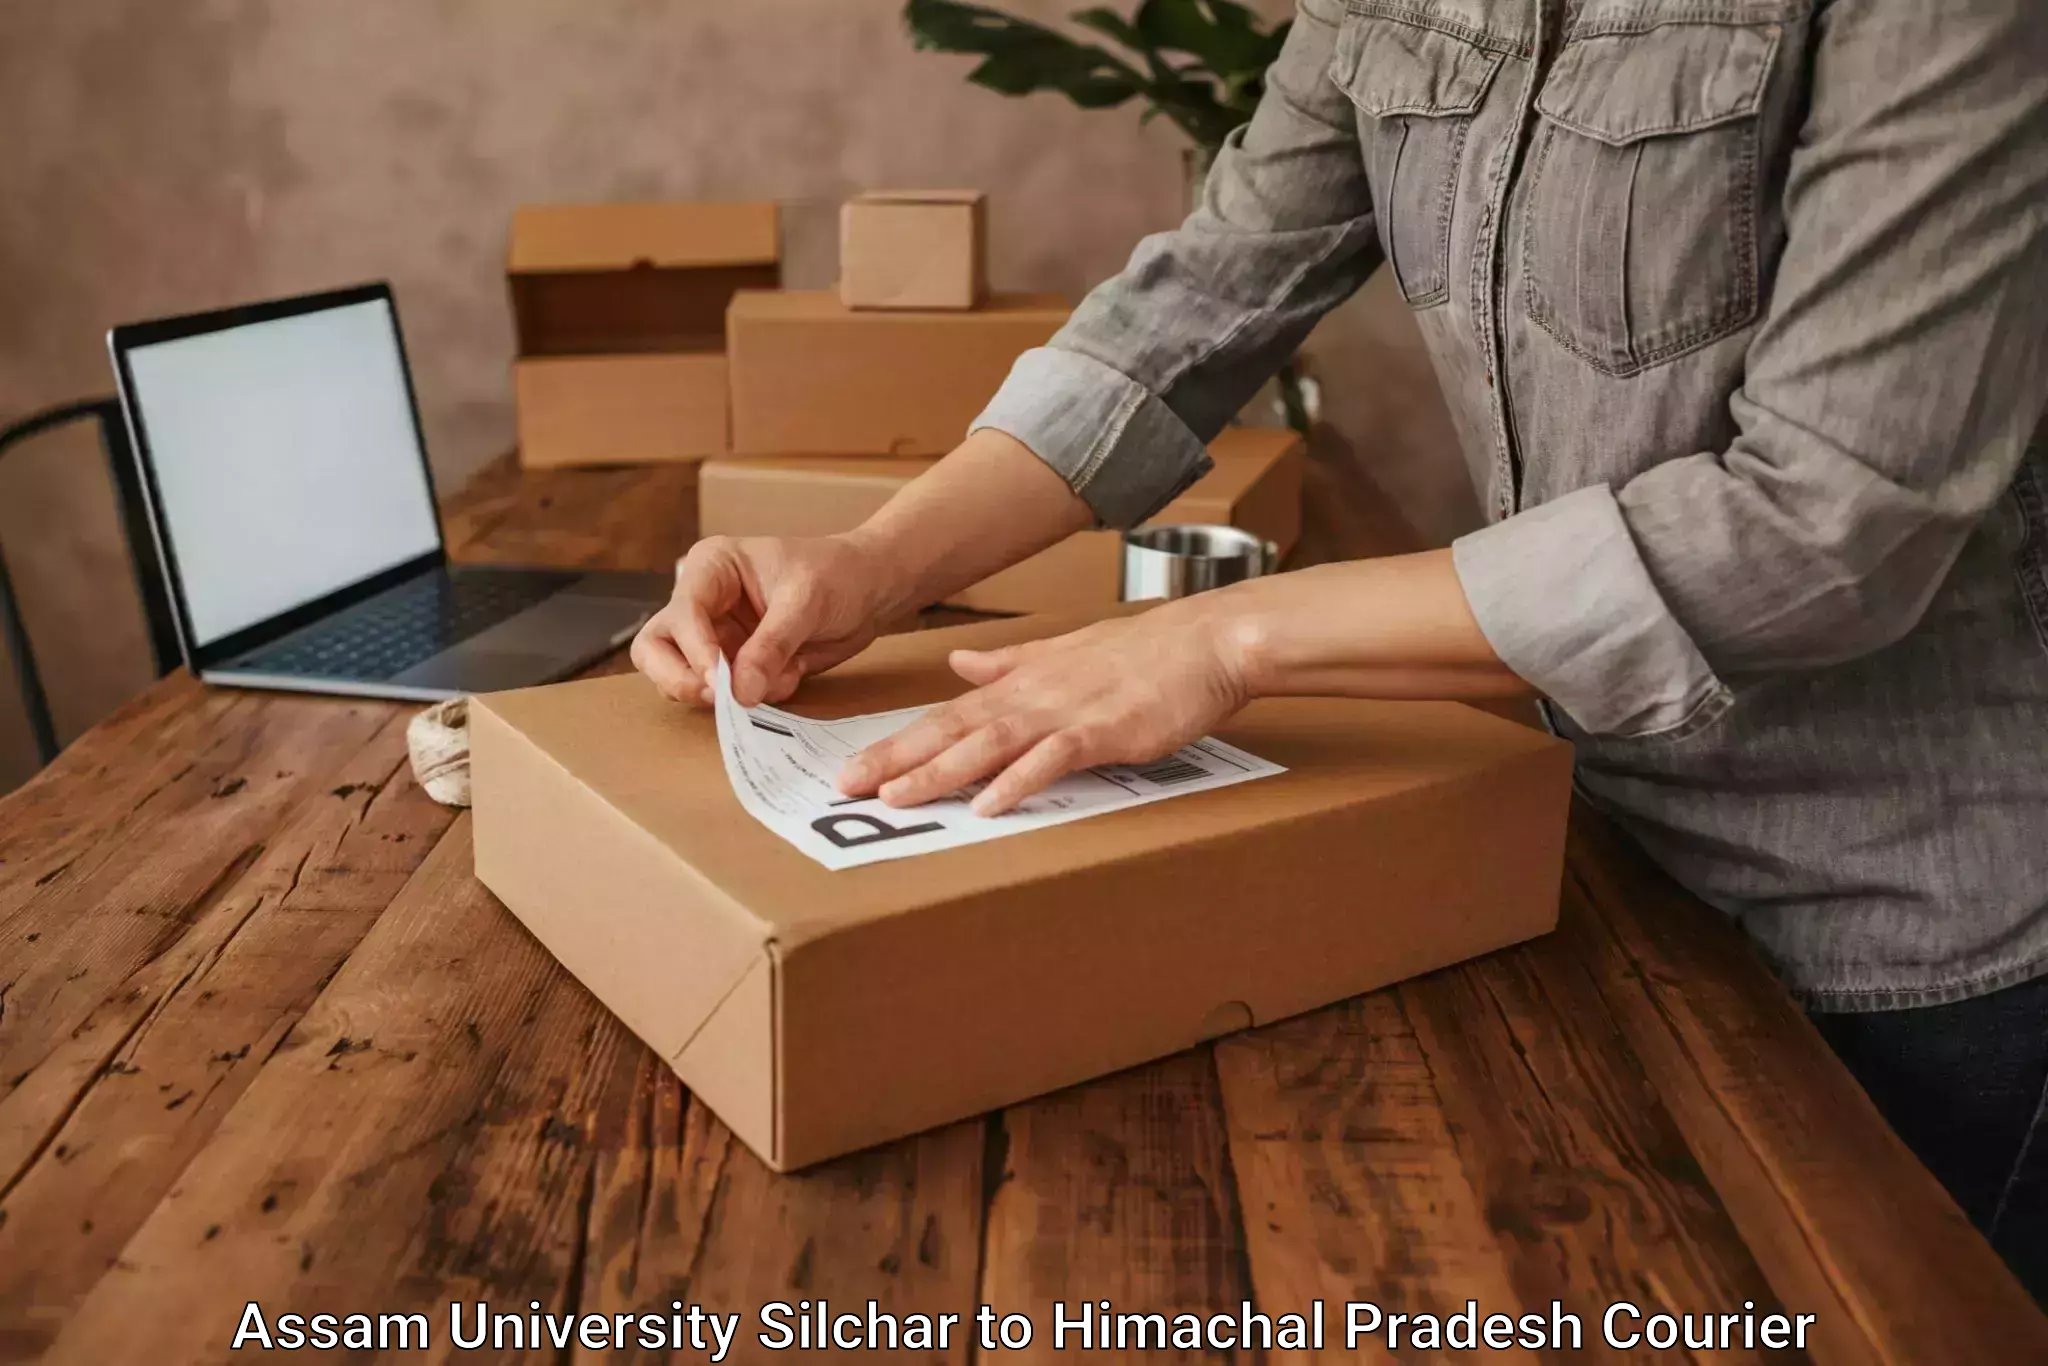 Global delivery options Assam University Silchar to Dheera